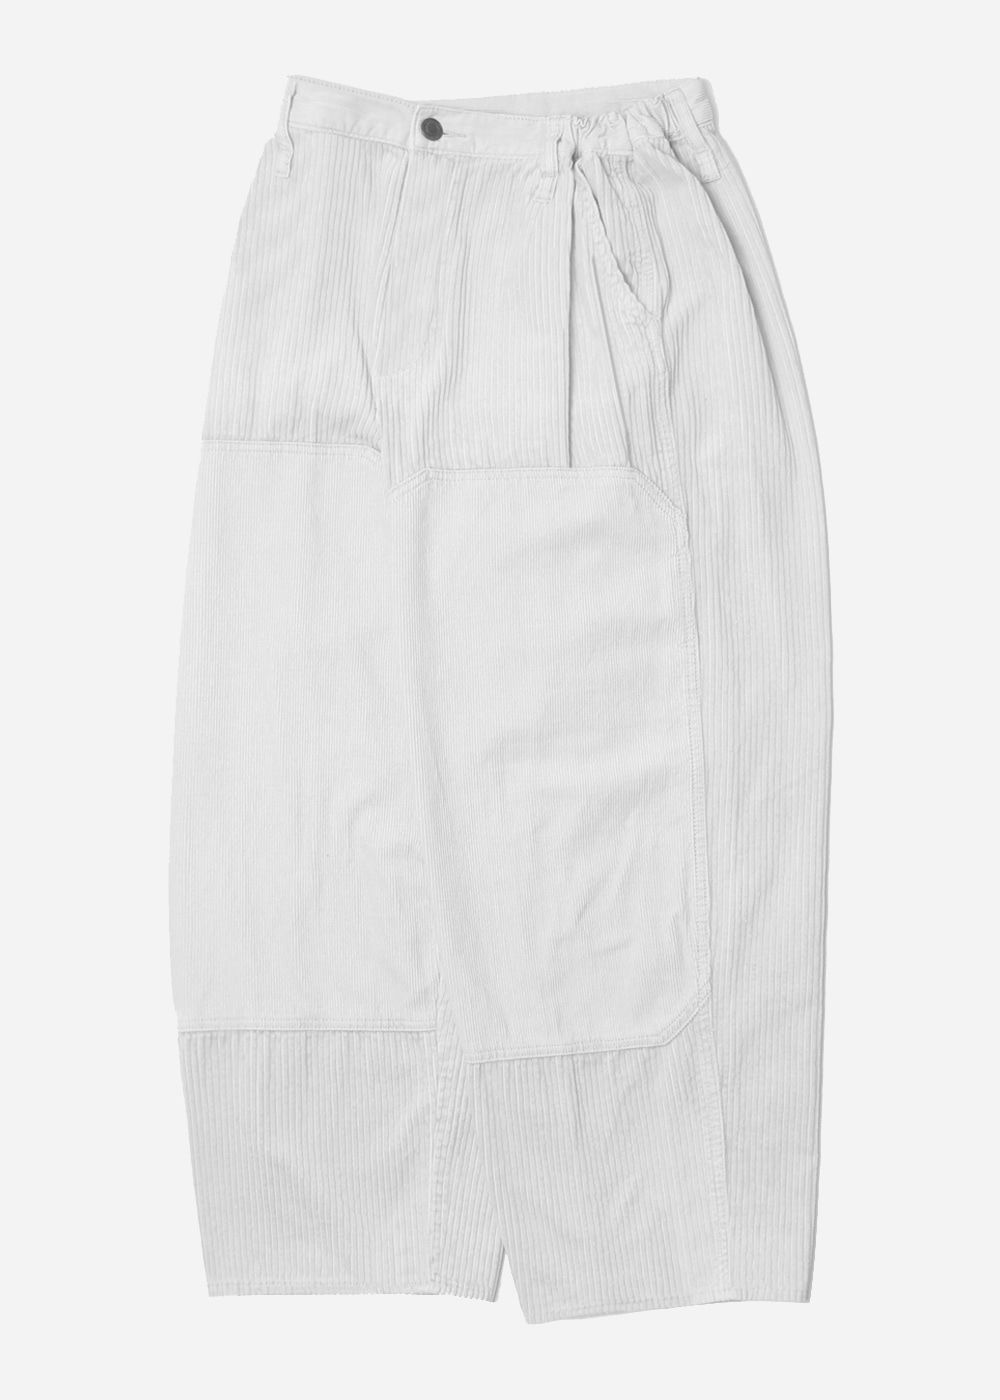 NIKO AND’wide fit’ hd corduroy pant